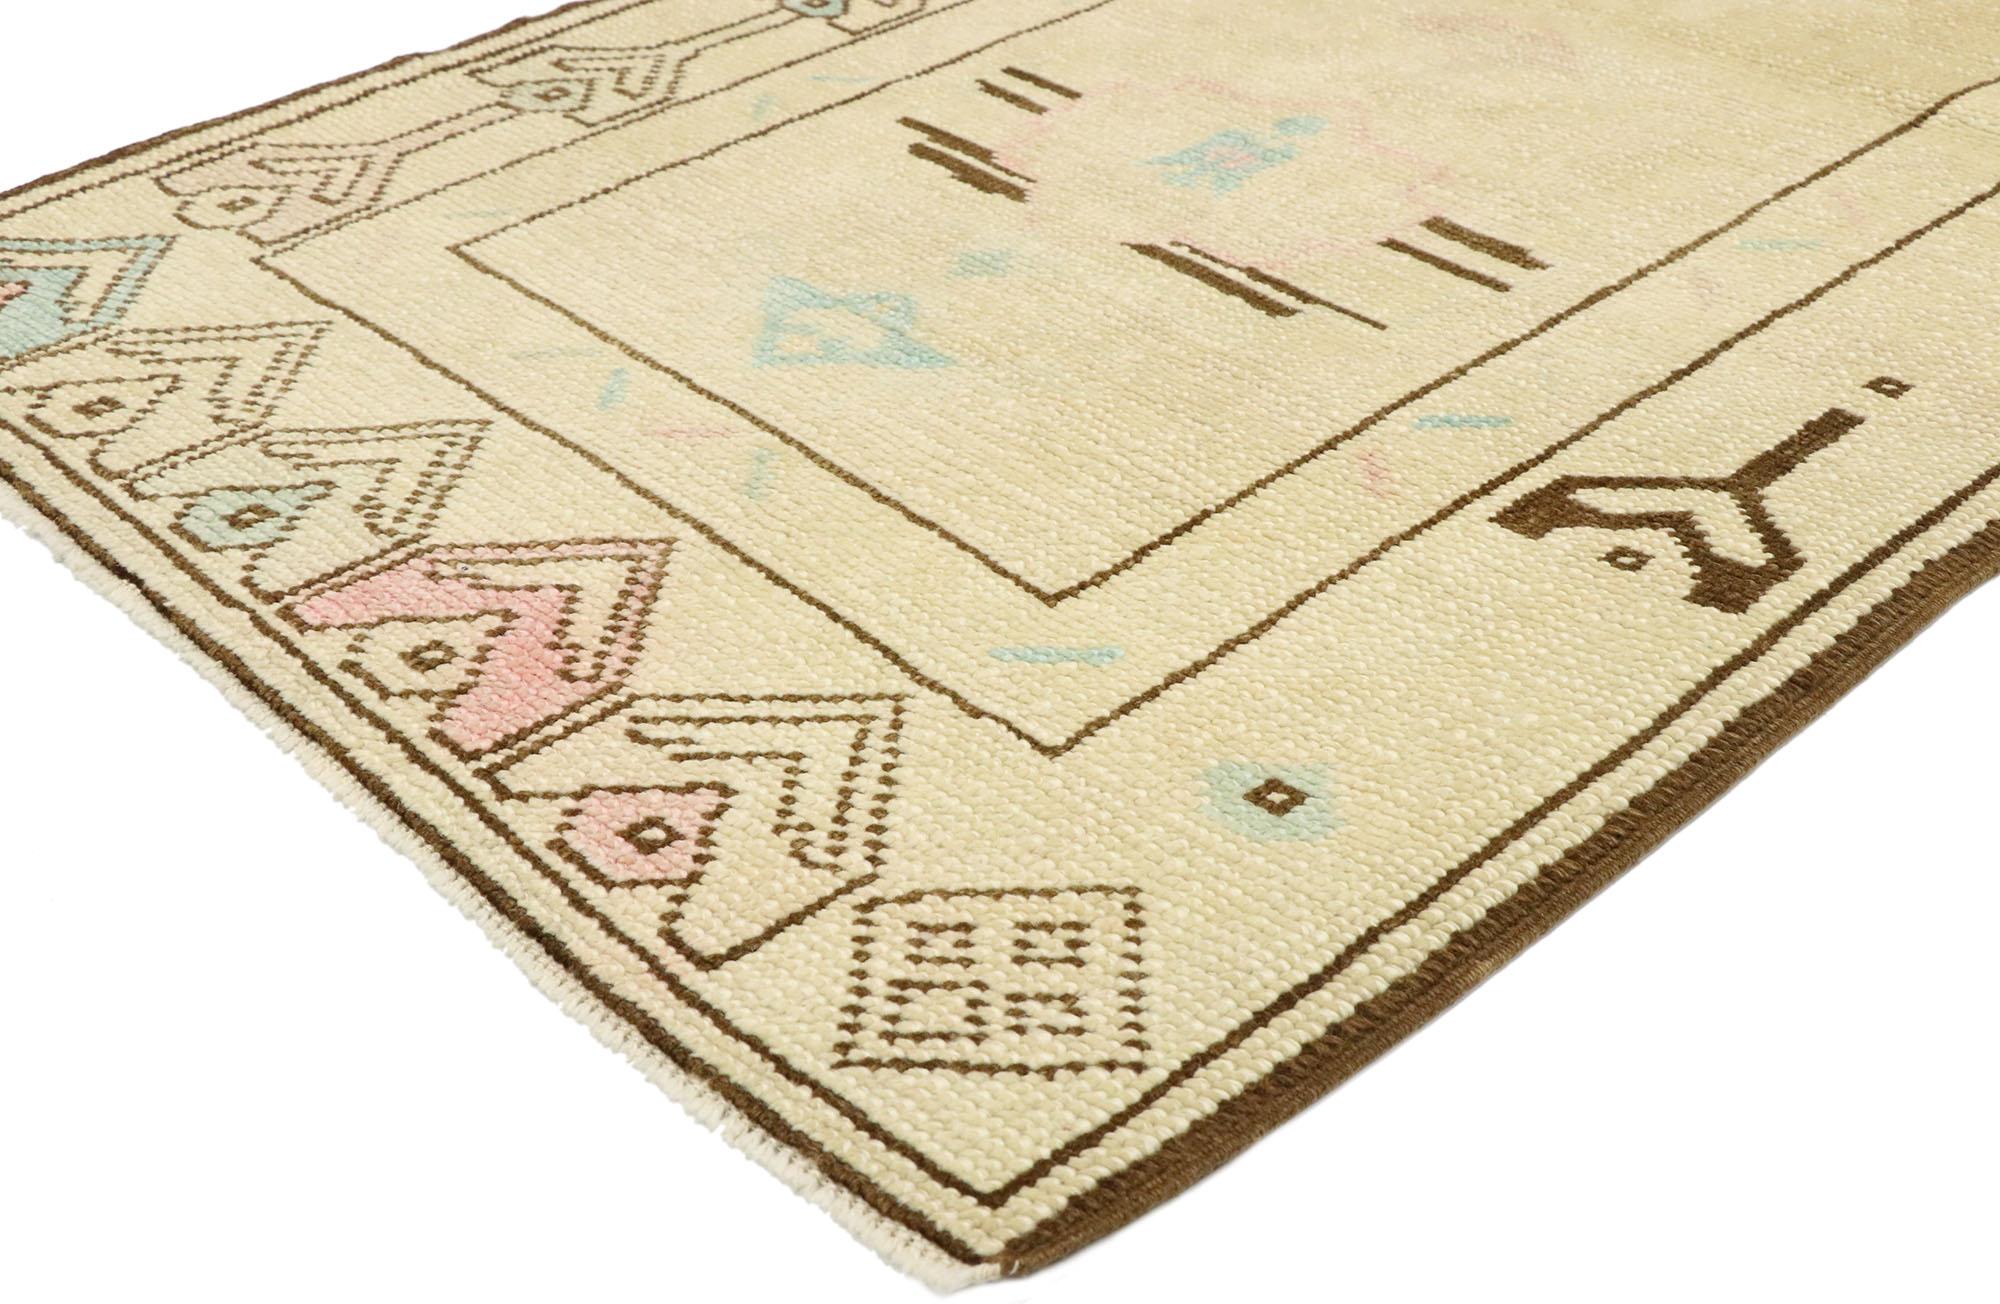 52931 vintage Turkish Oushak rug with romantic Georgian Cottage French style 02'09 x 05'04. Soft, bespoke vibes meet English Country Cottage style in this hand knotted wool vintage Turkish Oushak rug. The champagne-beige antique washed field